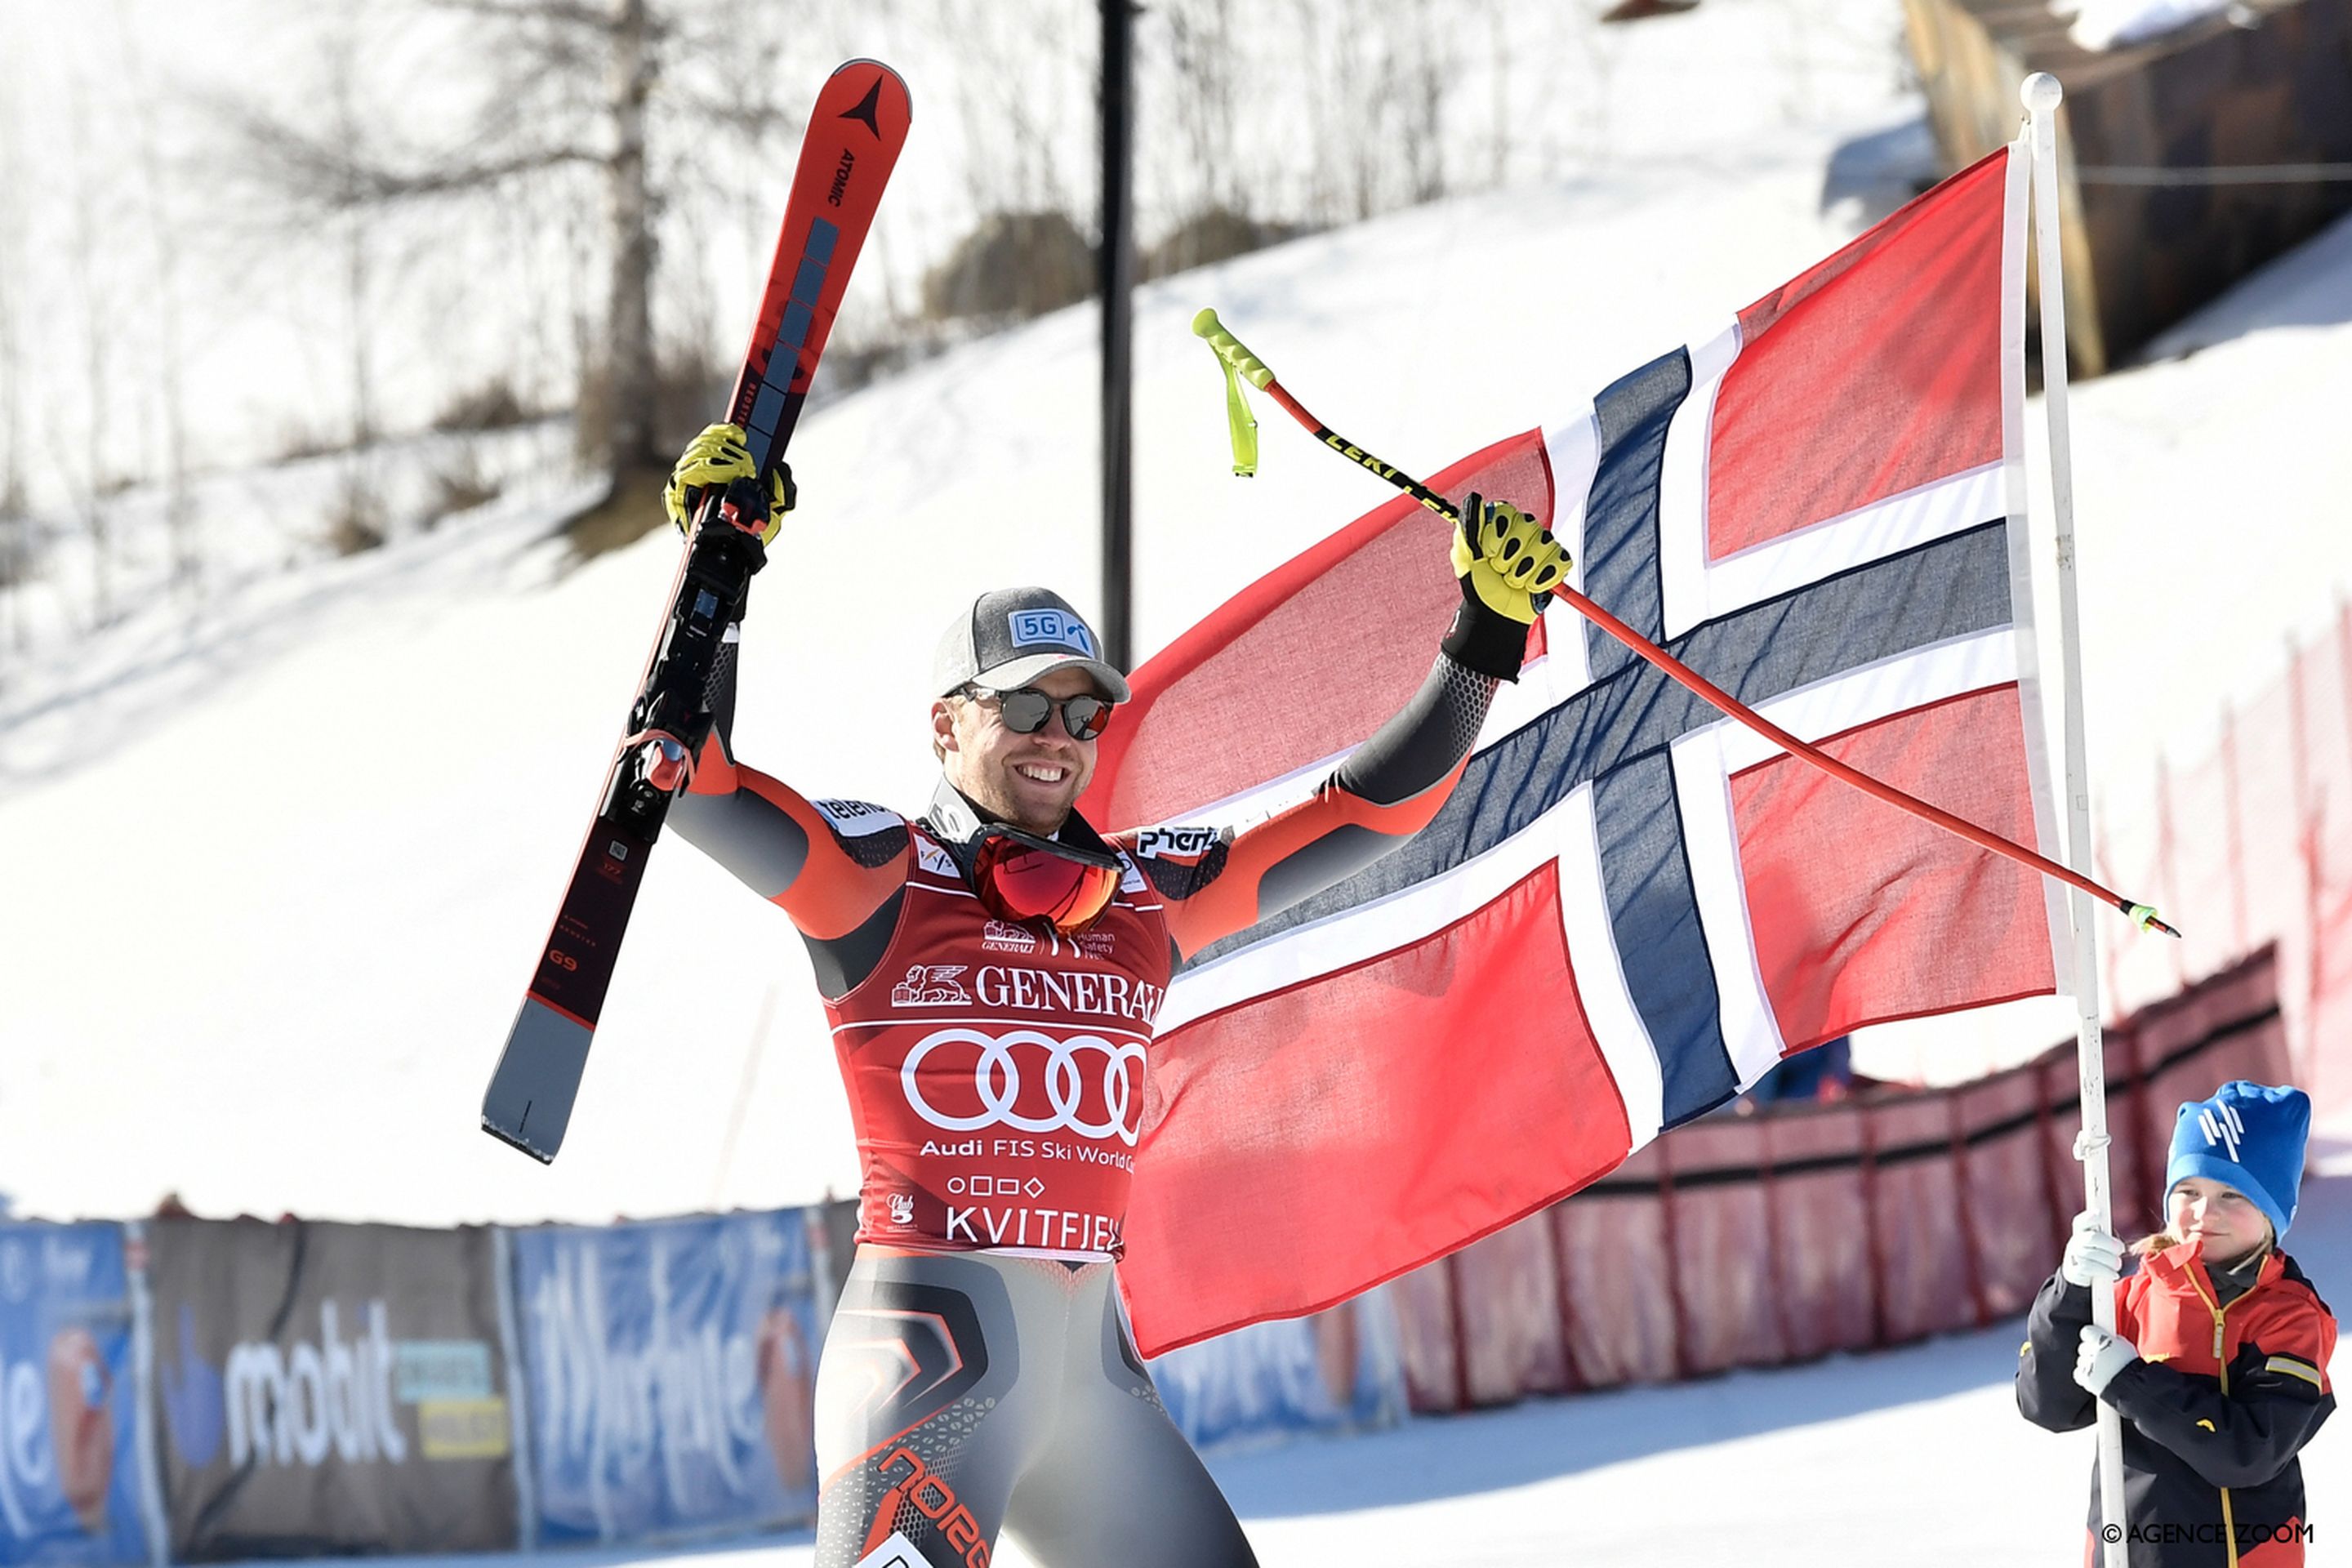 KVITFJELL, NORWAY - MARCH 6: Aleksander Aamodt Kilde of Team Norway takes 1st place during the Audi FIS Alpine Ski World Cup Men's Super G on March 6, 2022 in Kvitfjell Norway. (Photo by Jonas Ericsson/Agence Zoom)